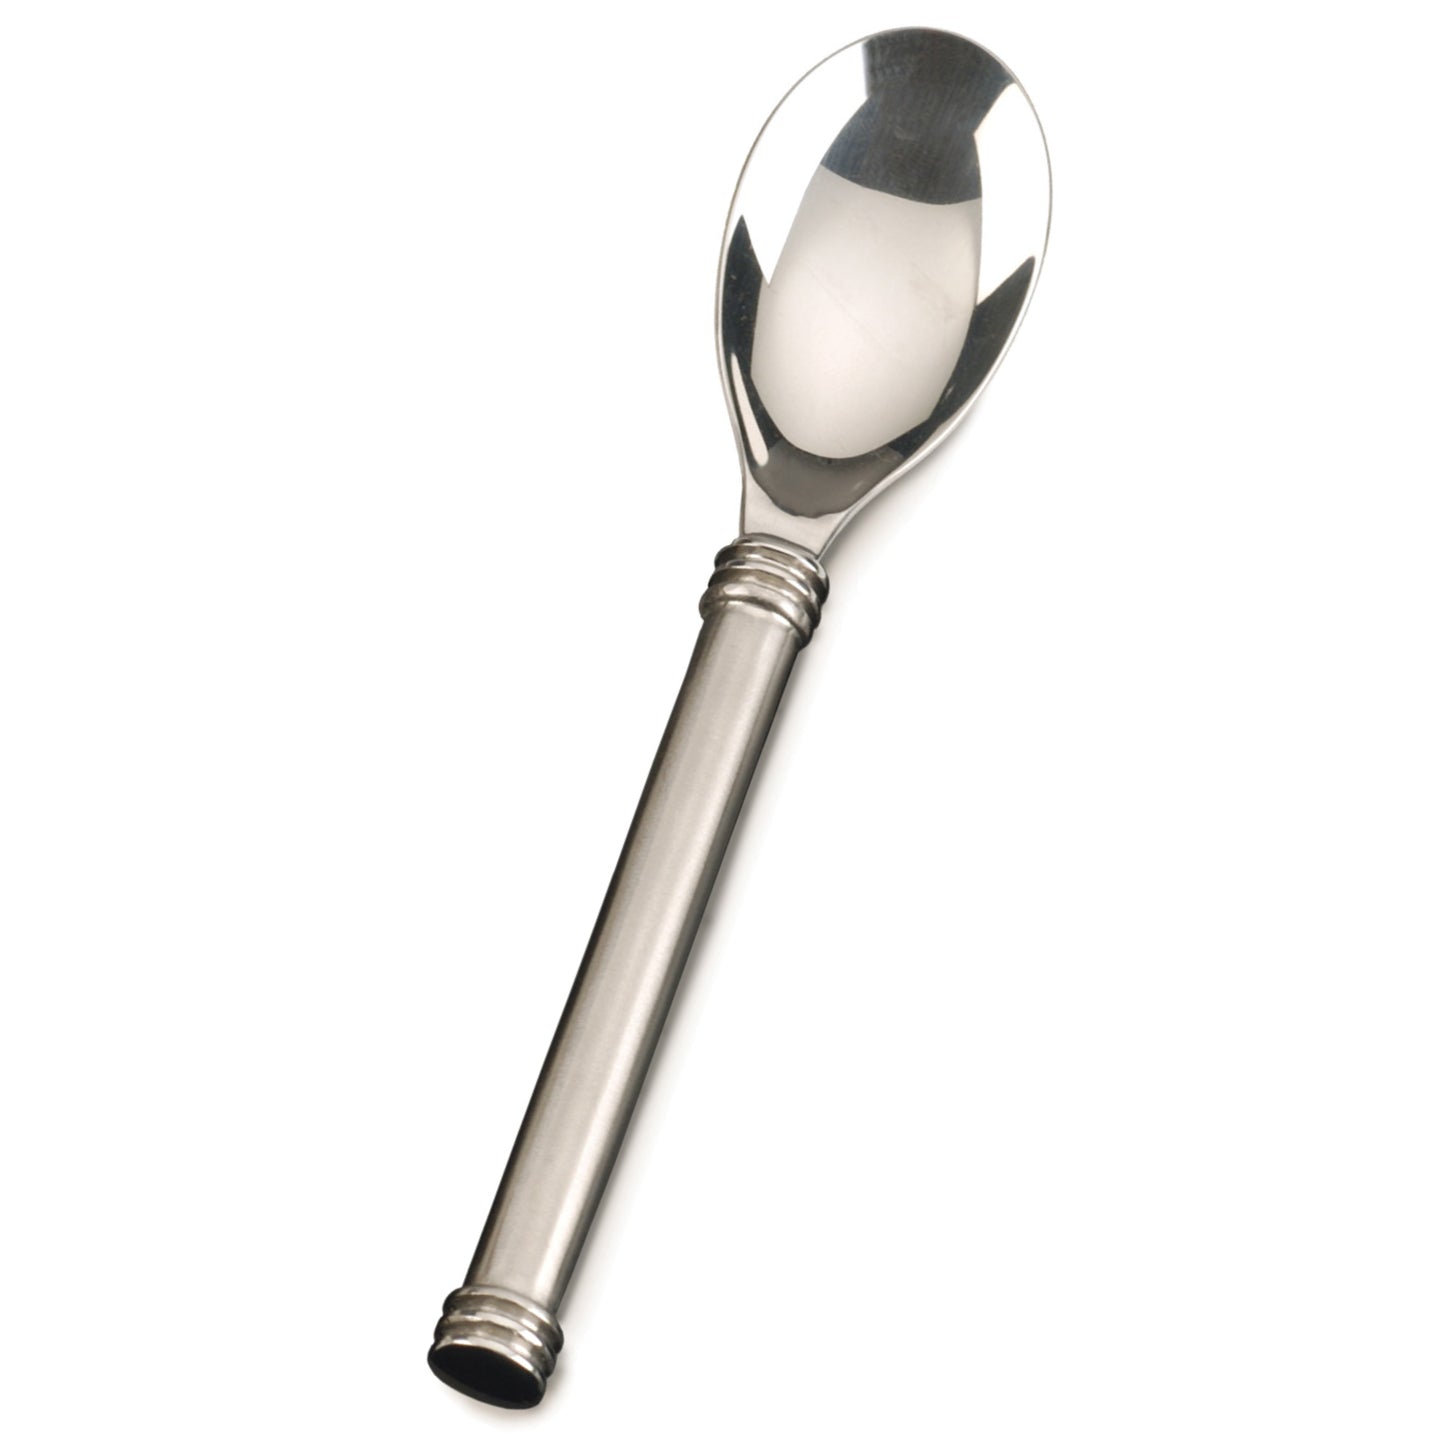 Endurance Appetizer Spoon – Stainless Steel